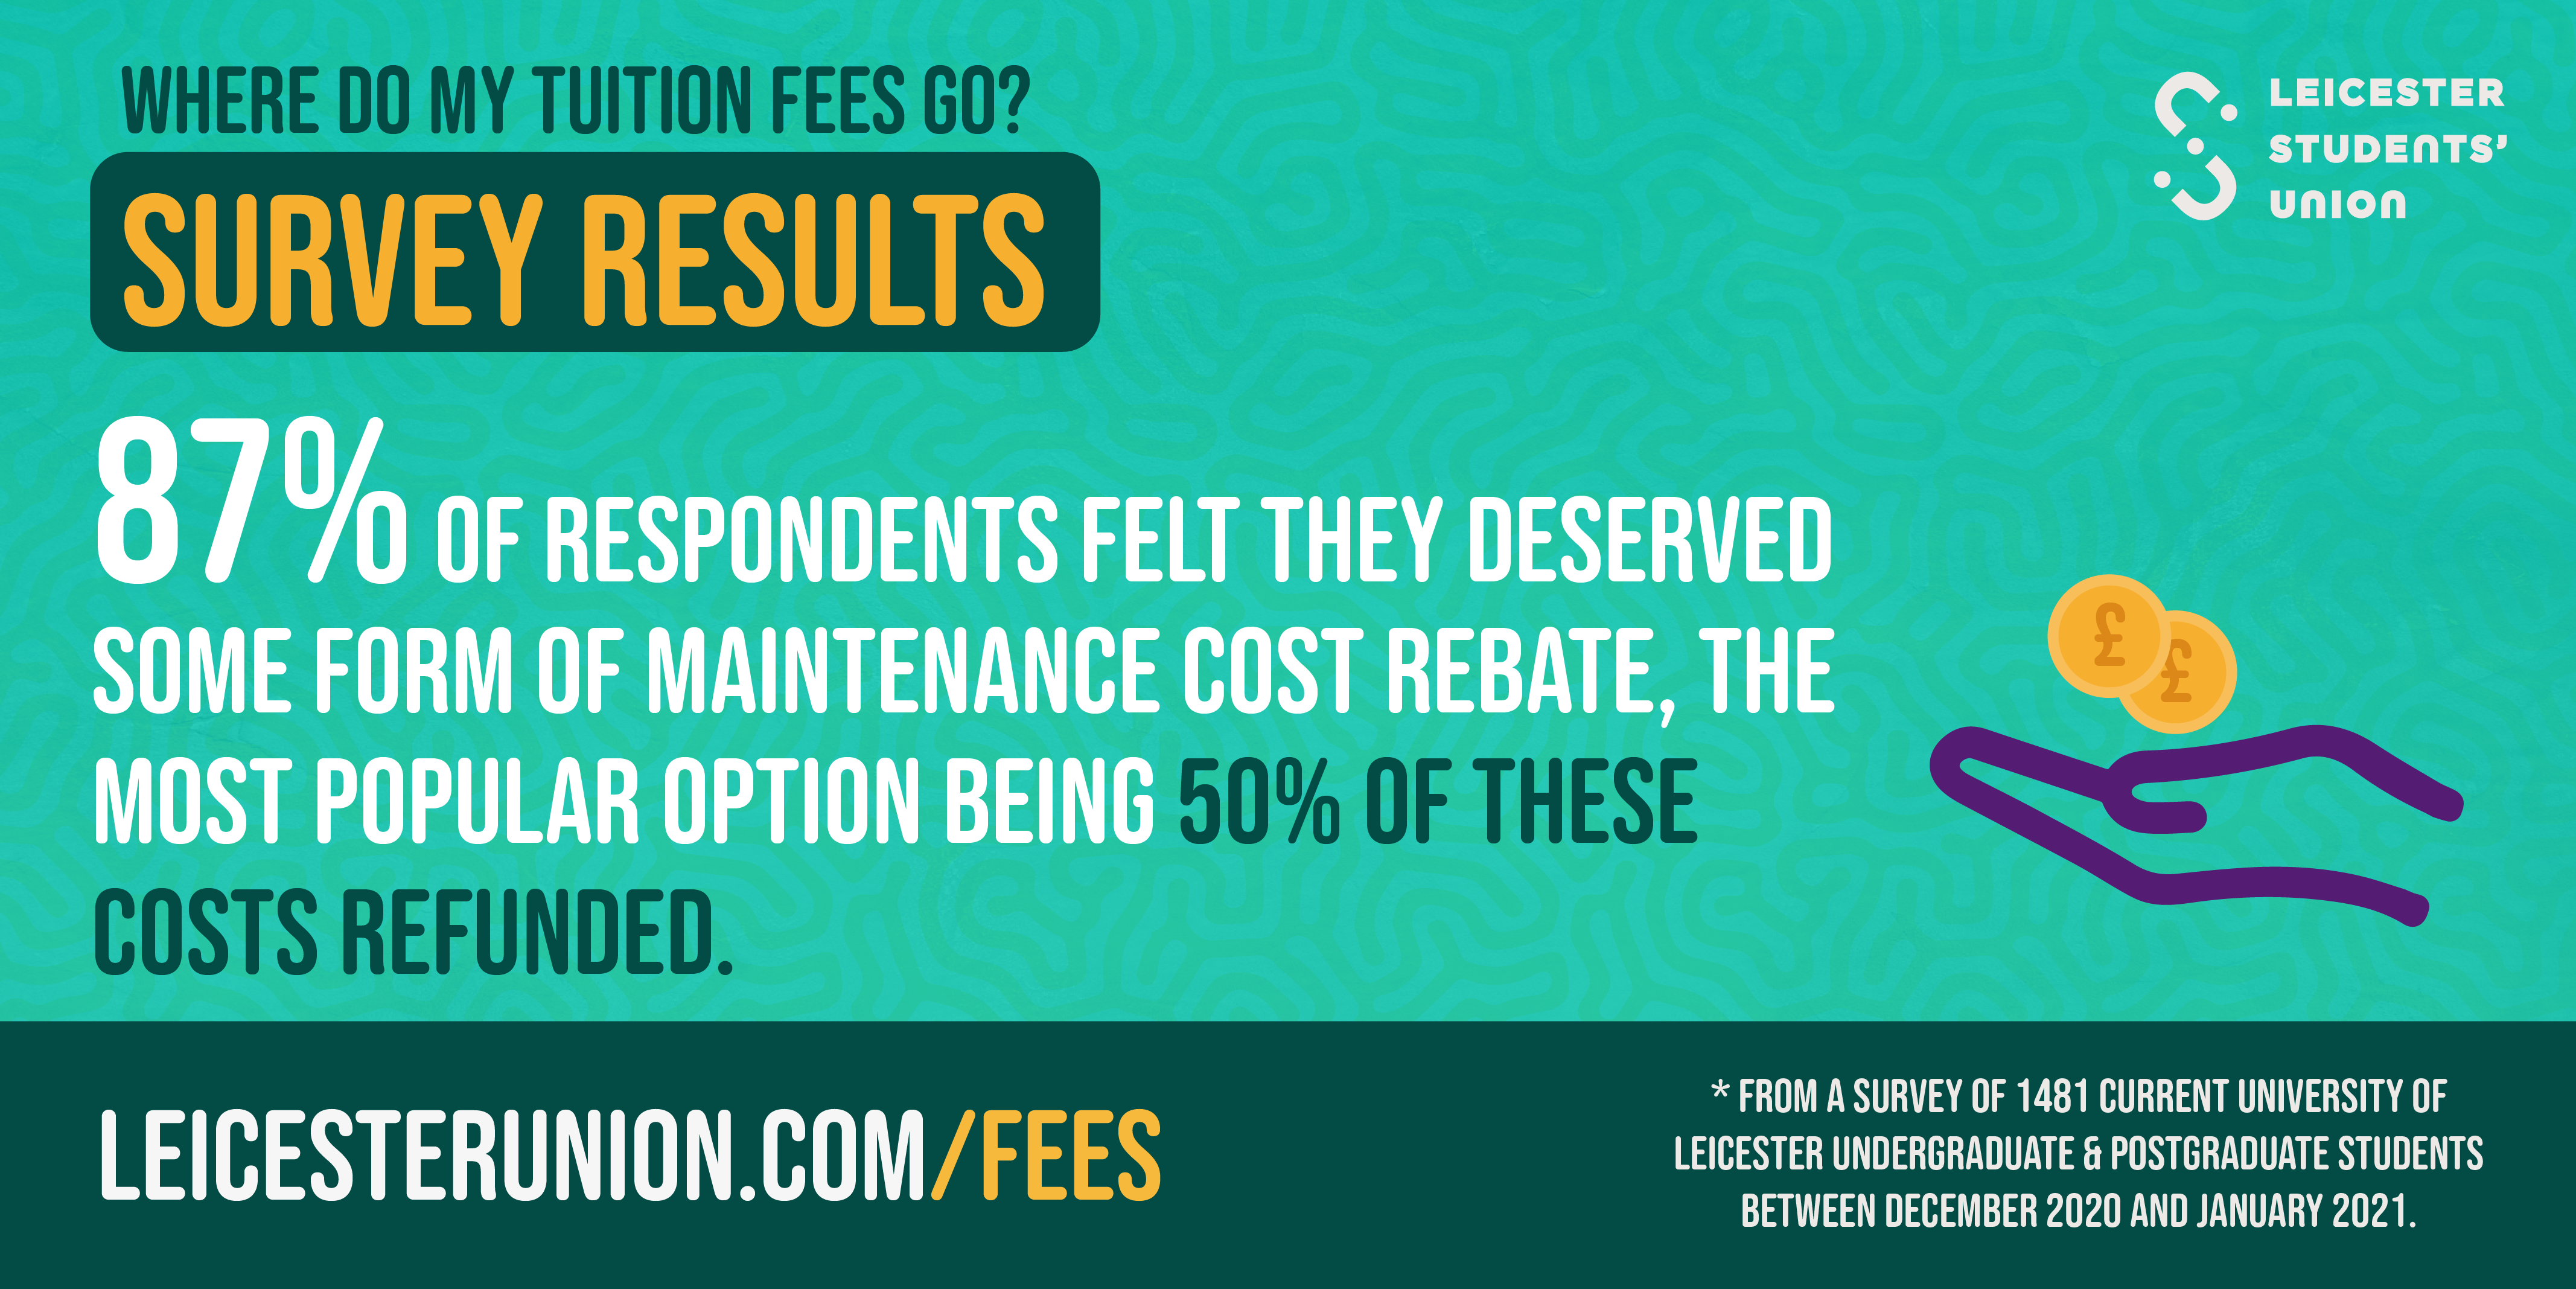 87% of respondents felt they deserved some form of maintenance cost rebate, the most popular option being 50% of these costs refunded.